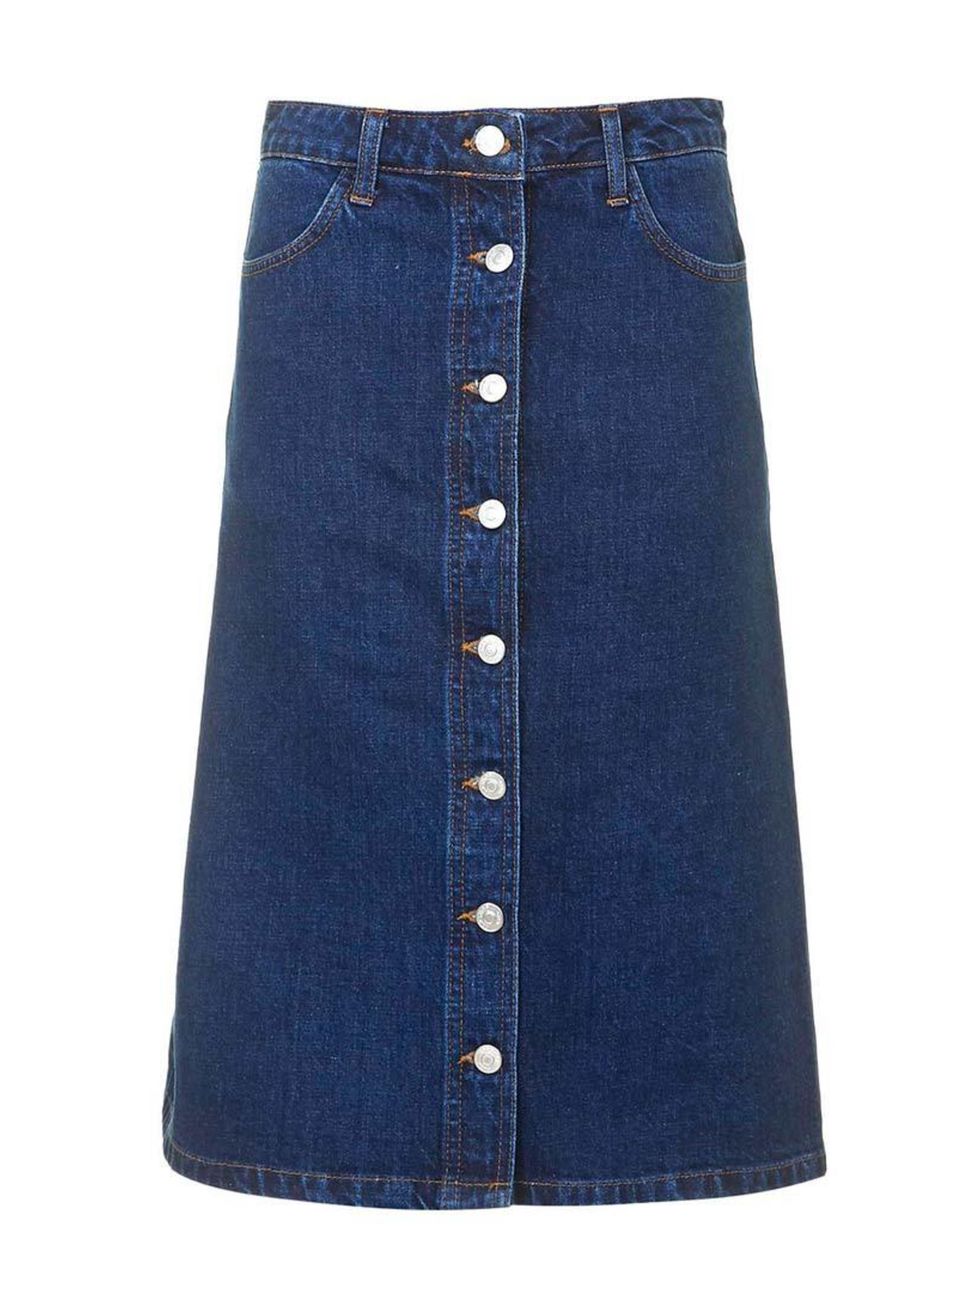 <p>Check out how <a href="http://www.elleuk.com/street-style/what-elle-wears/denim-shopping-jeans-trends-fashion-accessories">team ELLE wears denim</a>.</p>

<p><a href="http://www.topshop.com/en/tsuk/product/new-in-this-week-2169932/new-in-this-week-493/